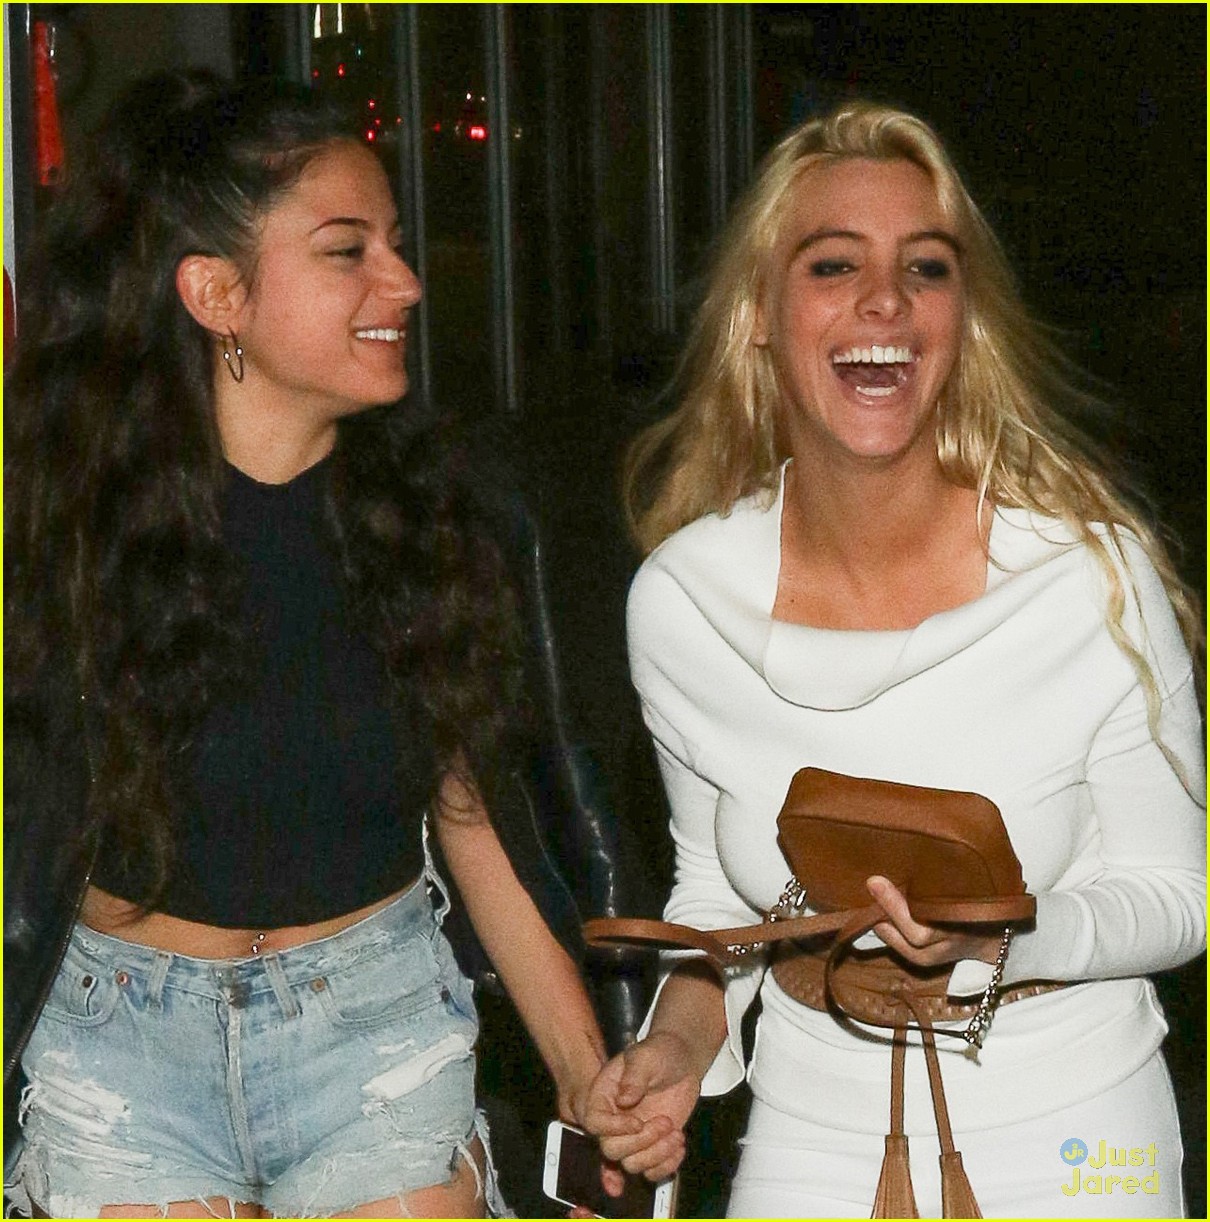 Lele Pons And Inanna